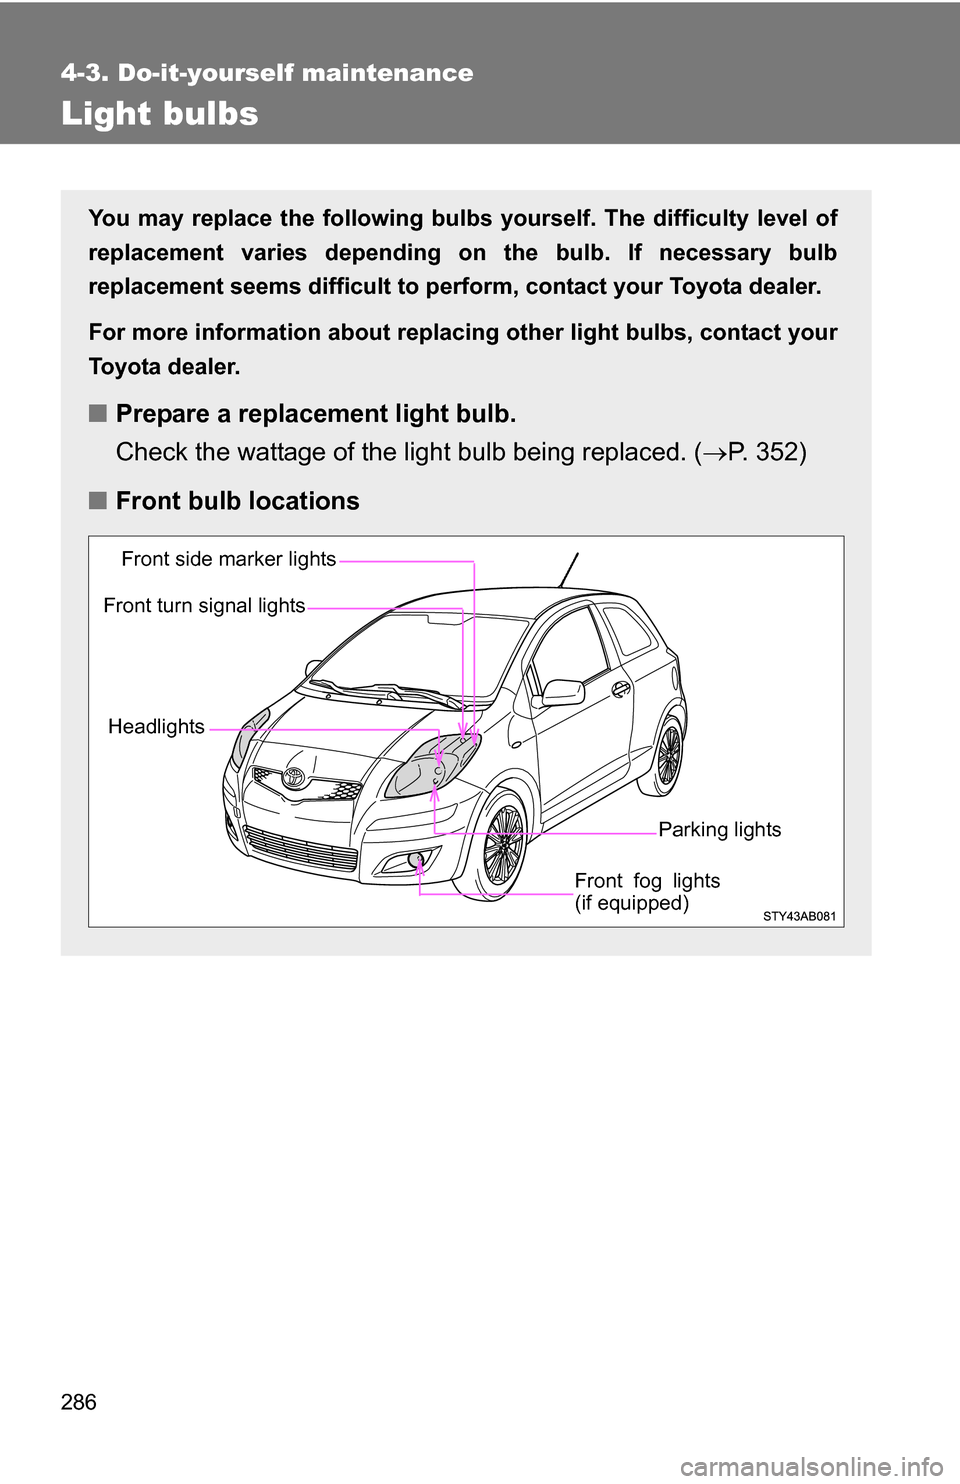 TOYOTA YARIS 2009 2.G Owners Manual 286
4-3. Do-it-yourself maintenance
Light bulbs
You may replace the following bulbs yourself. The difficulty level of
replacement varies depending on the bulb. If necessary bulb
replacement seems diff